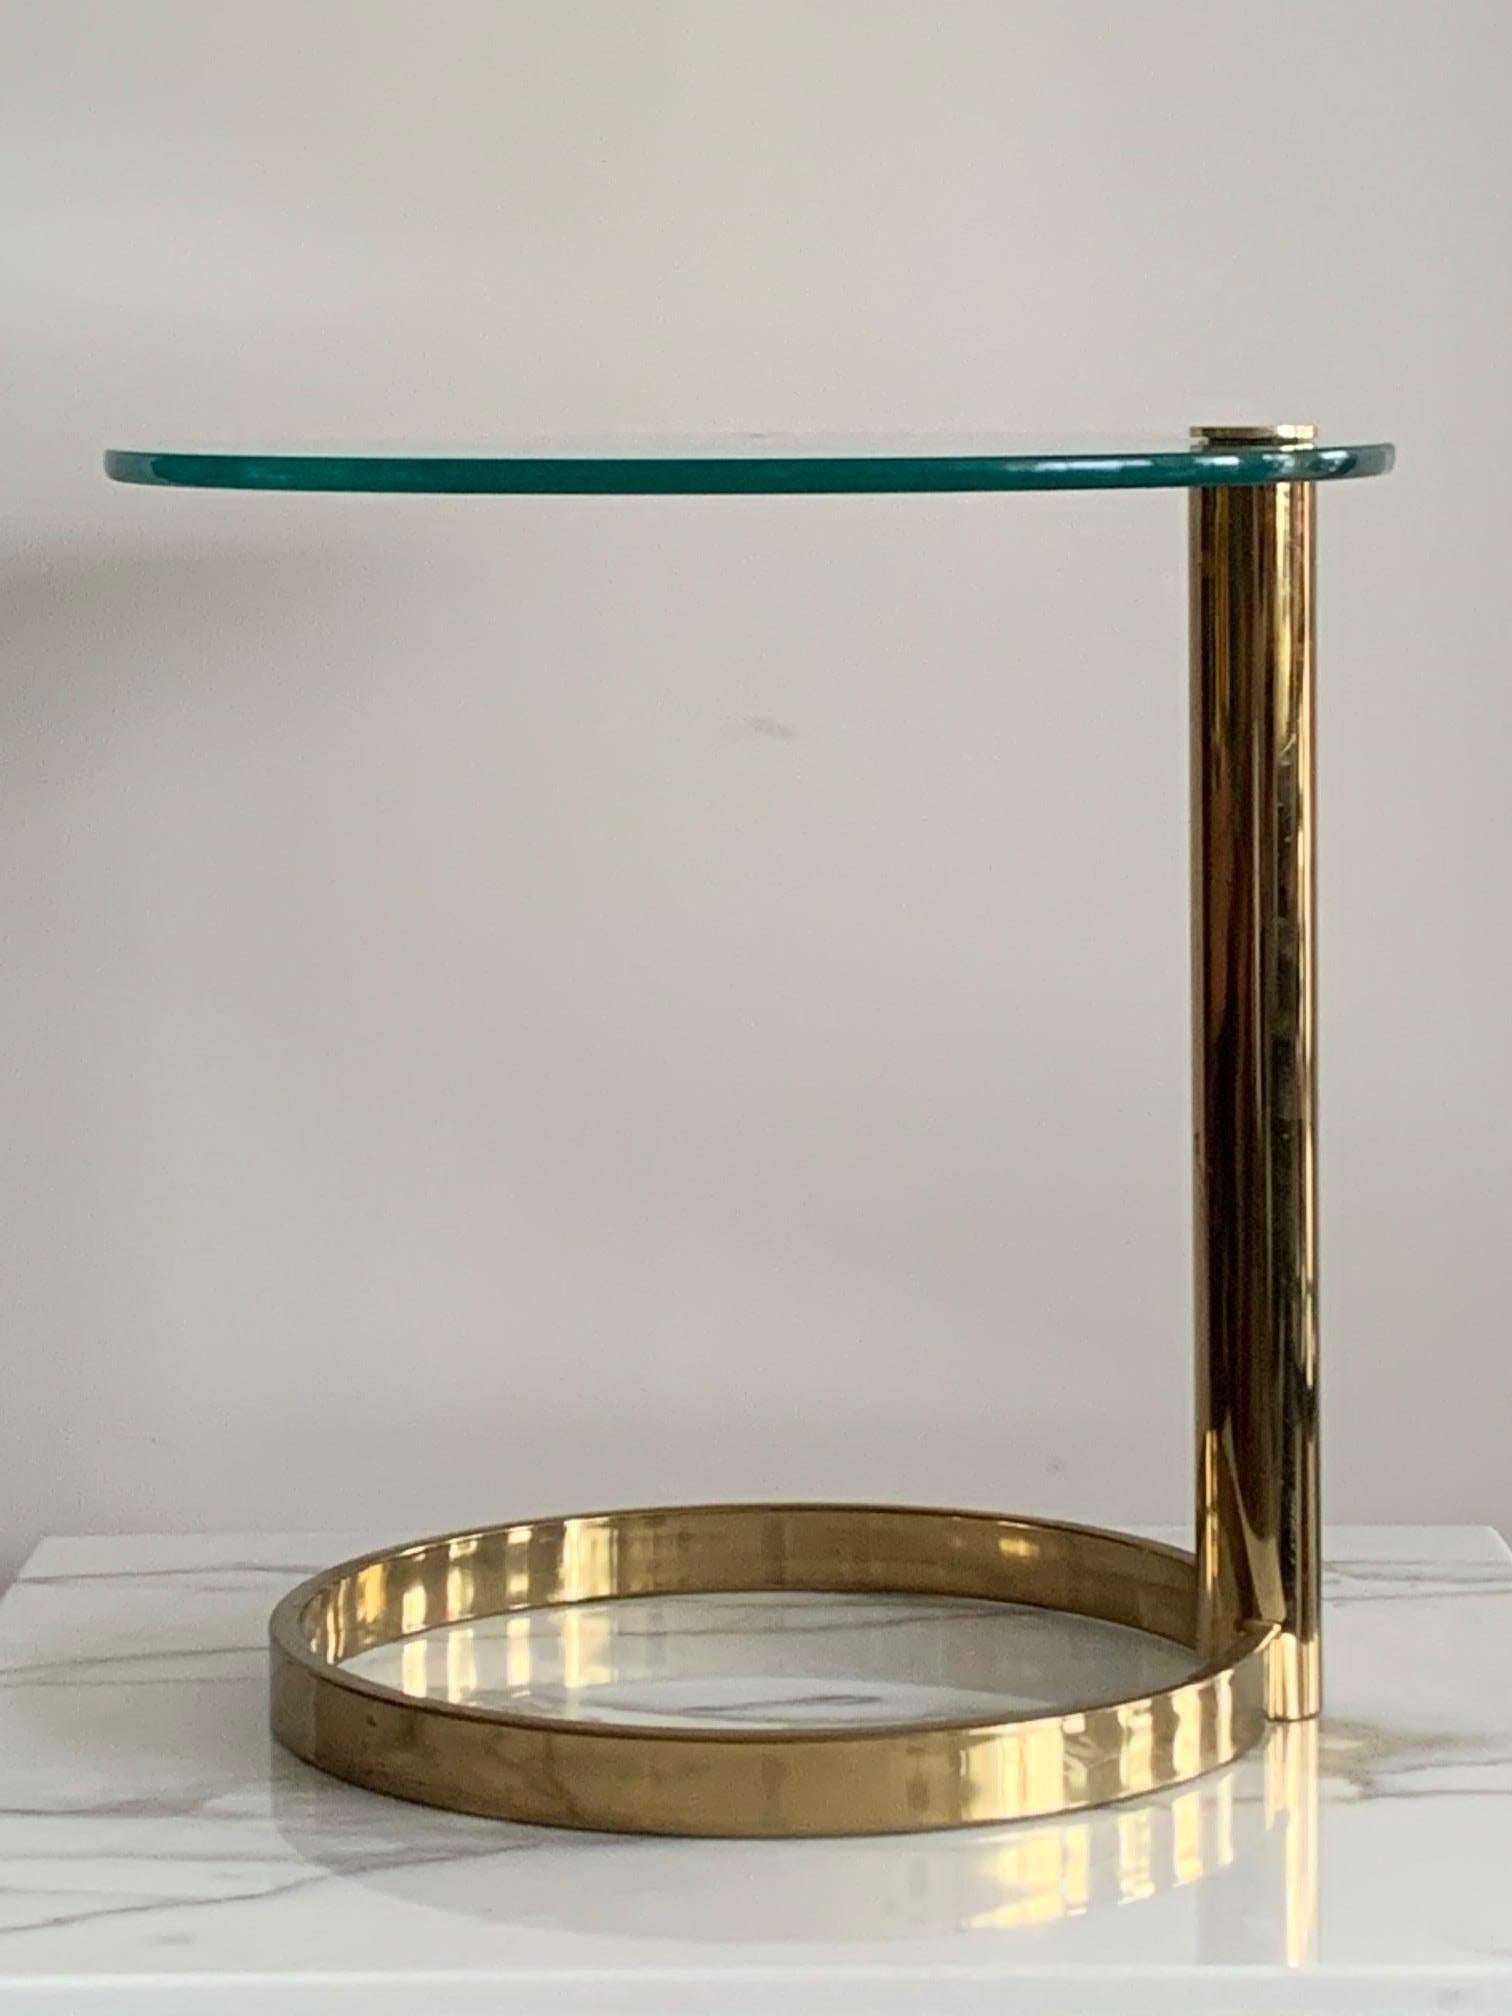 An unusual Mid-Century Modern Hollywood Regency brass and side table designed by Leon Rosen for the Pace Collection. The table features a circular brass base with a single brass pedestal and a thick cantilevered glass top. Perfect as an occasional